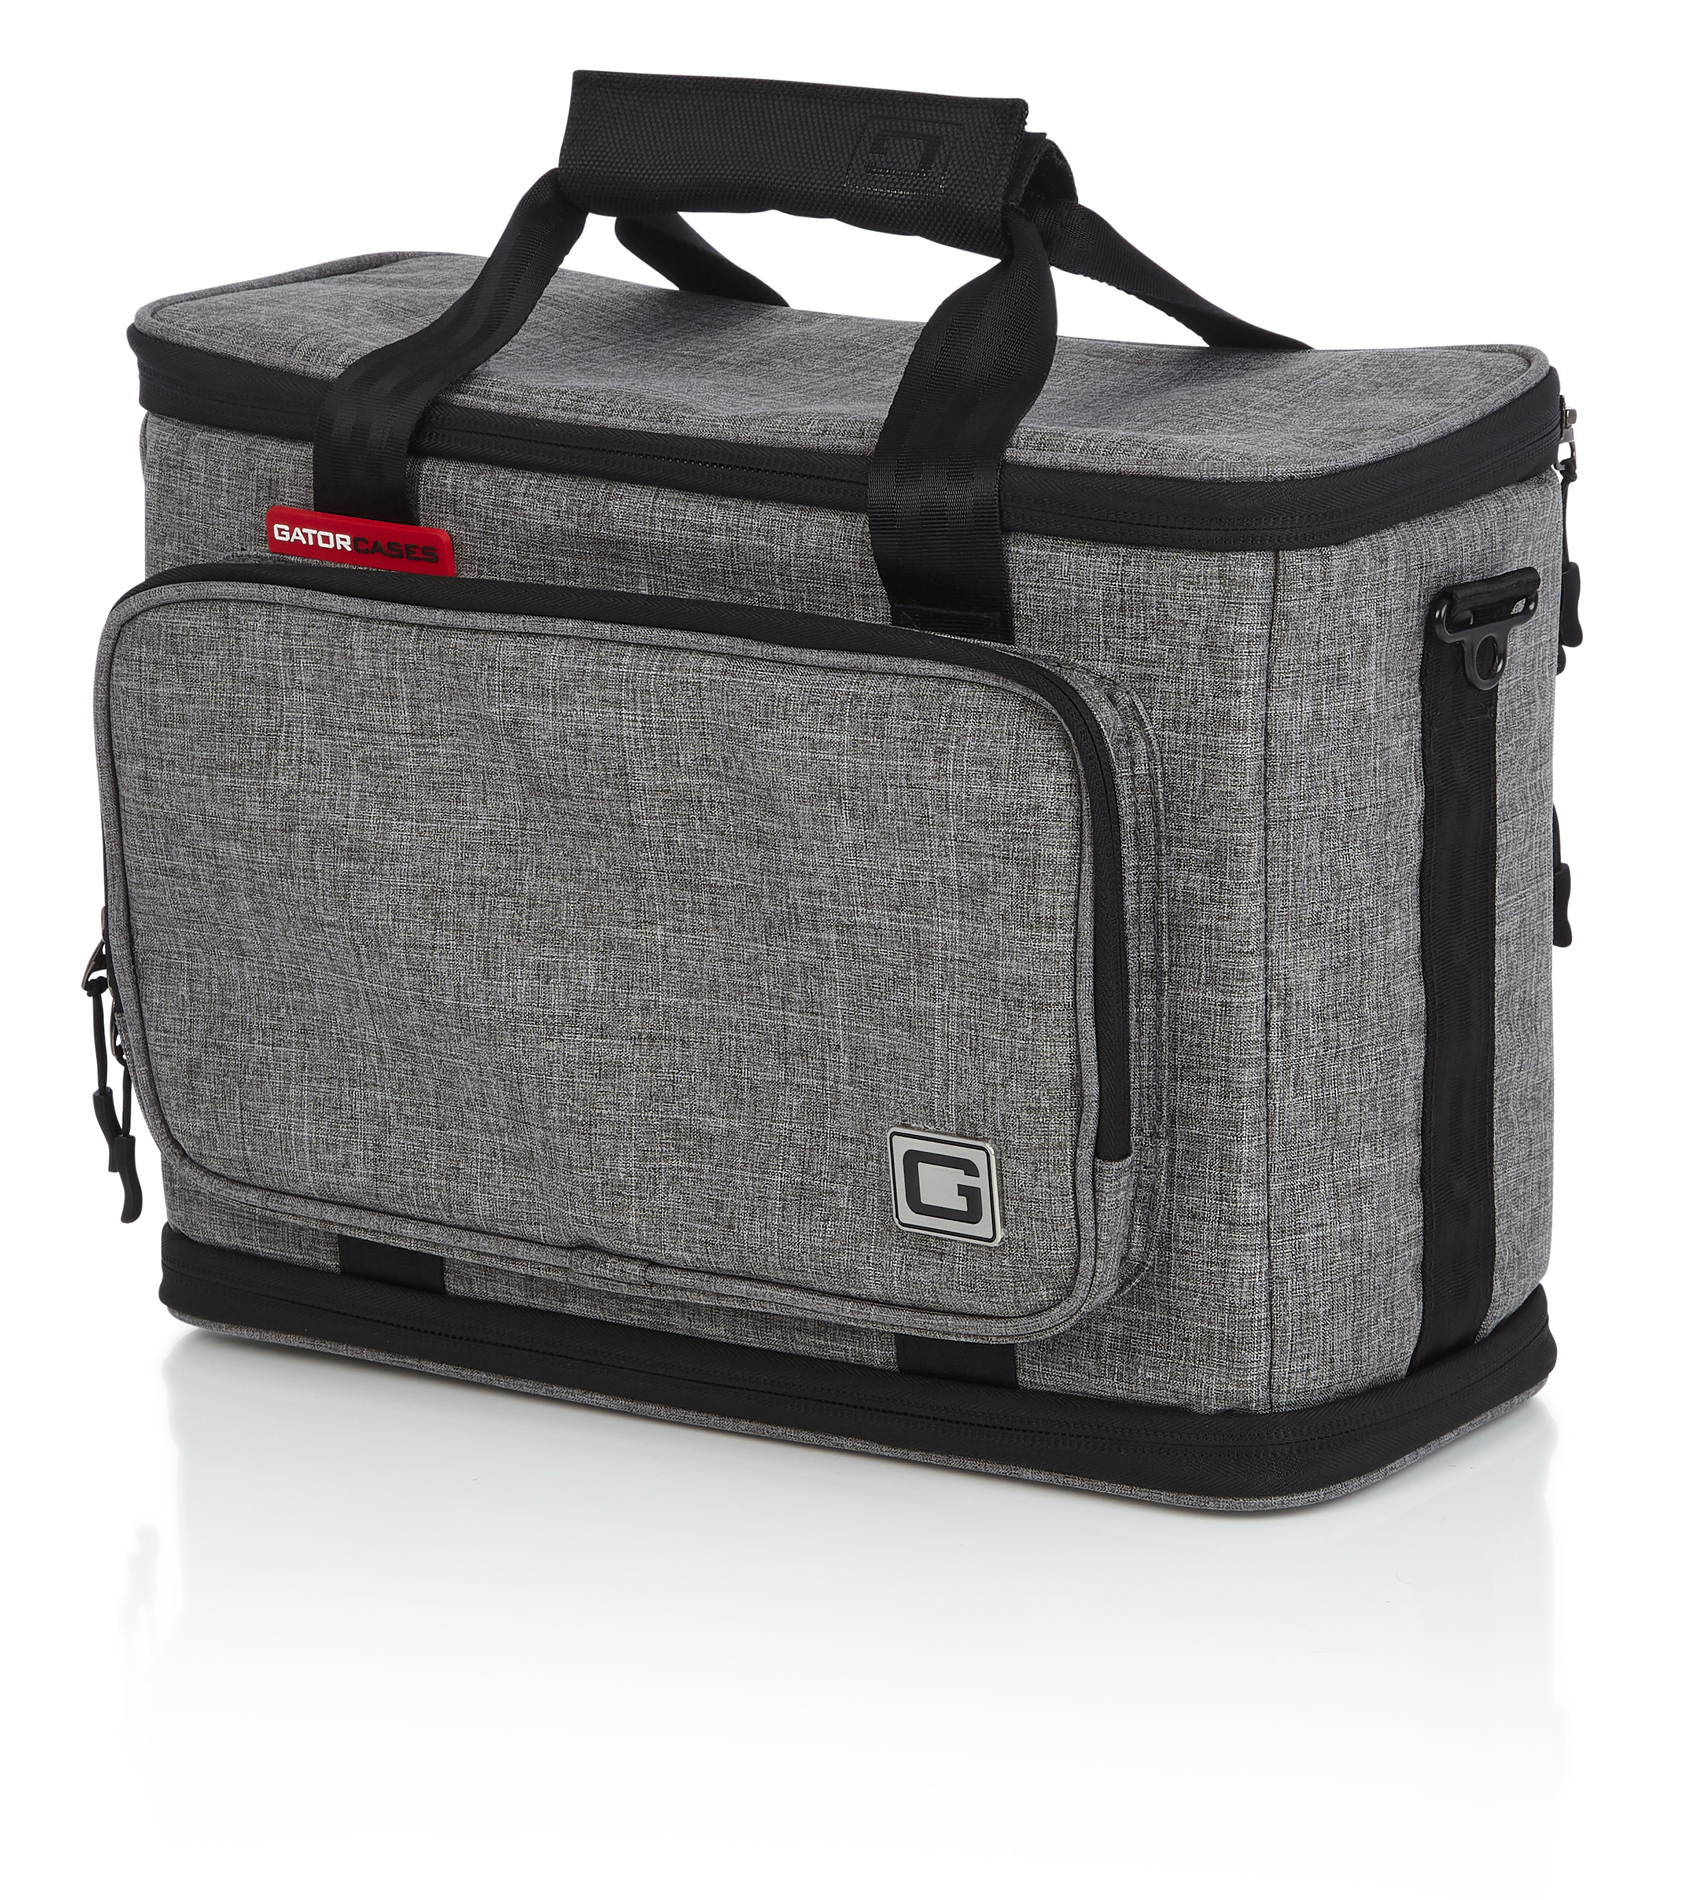 Transit Style Bag For Universal Ox-GT-UNIVERSALOX